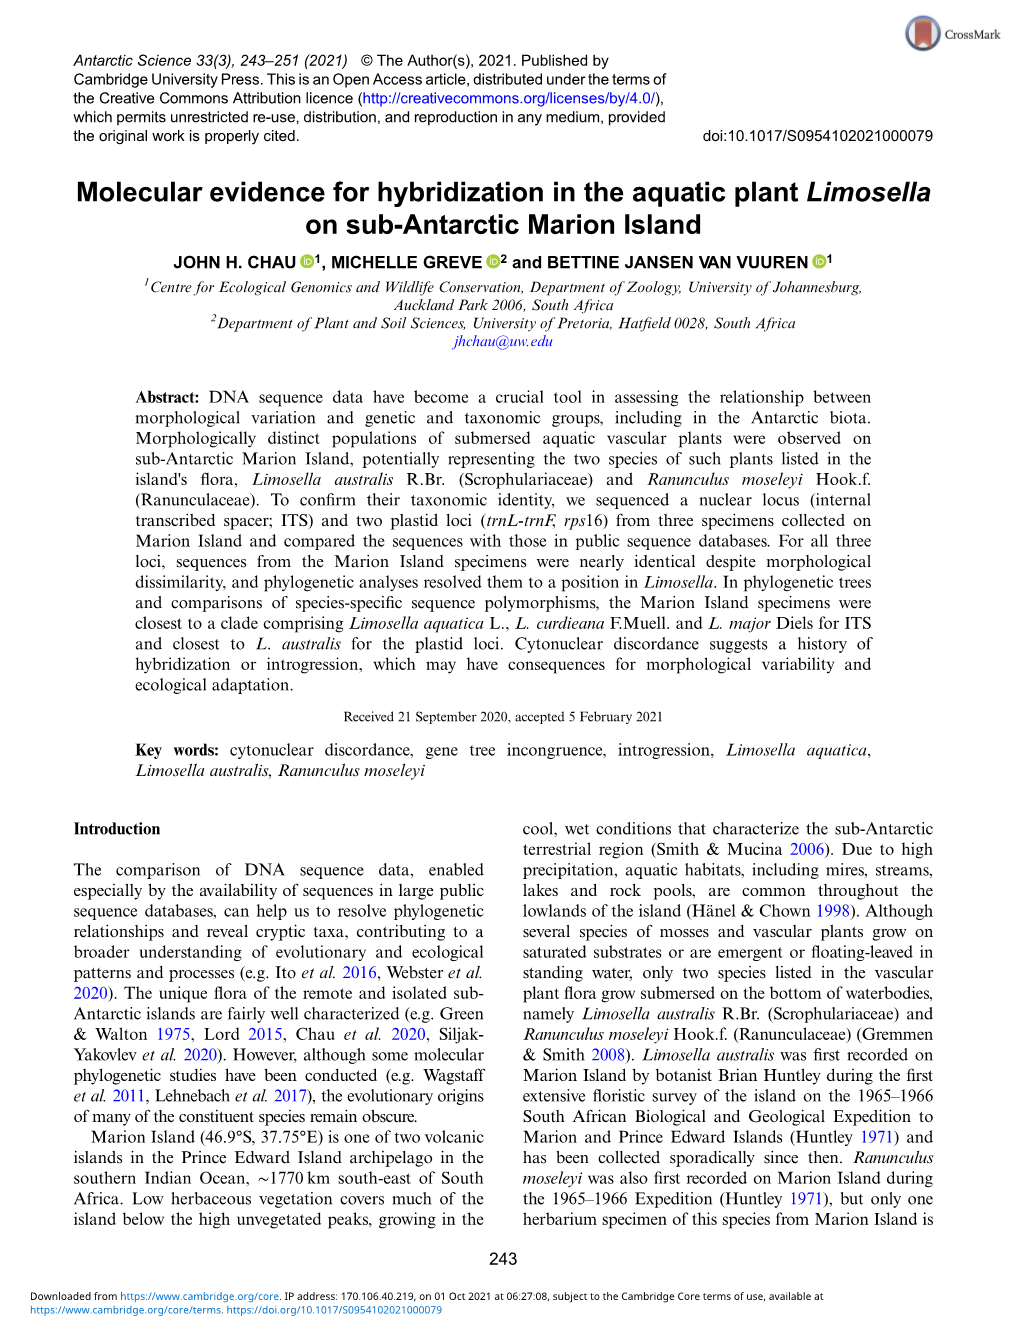 Molecular Evidence for Hybridization in the Aquatic Plant Limosella on Sub-Antarctic Marion Island